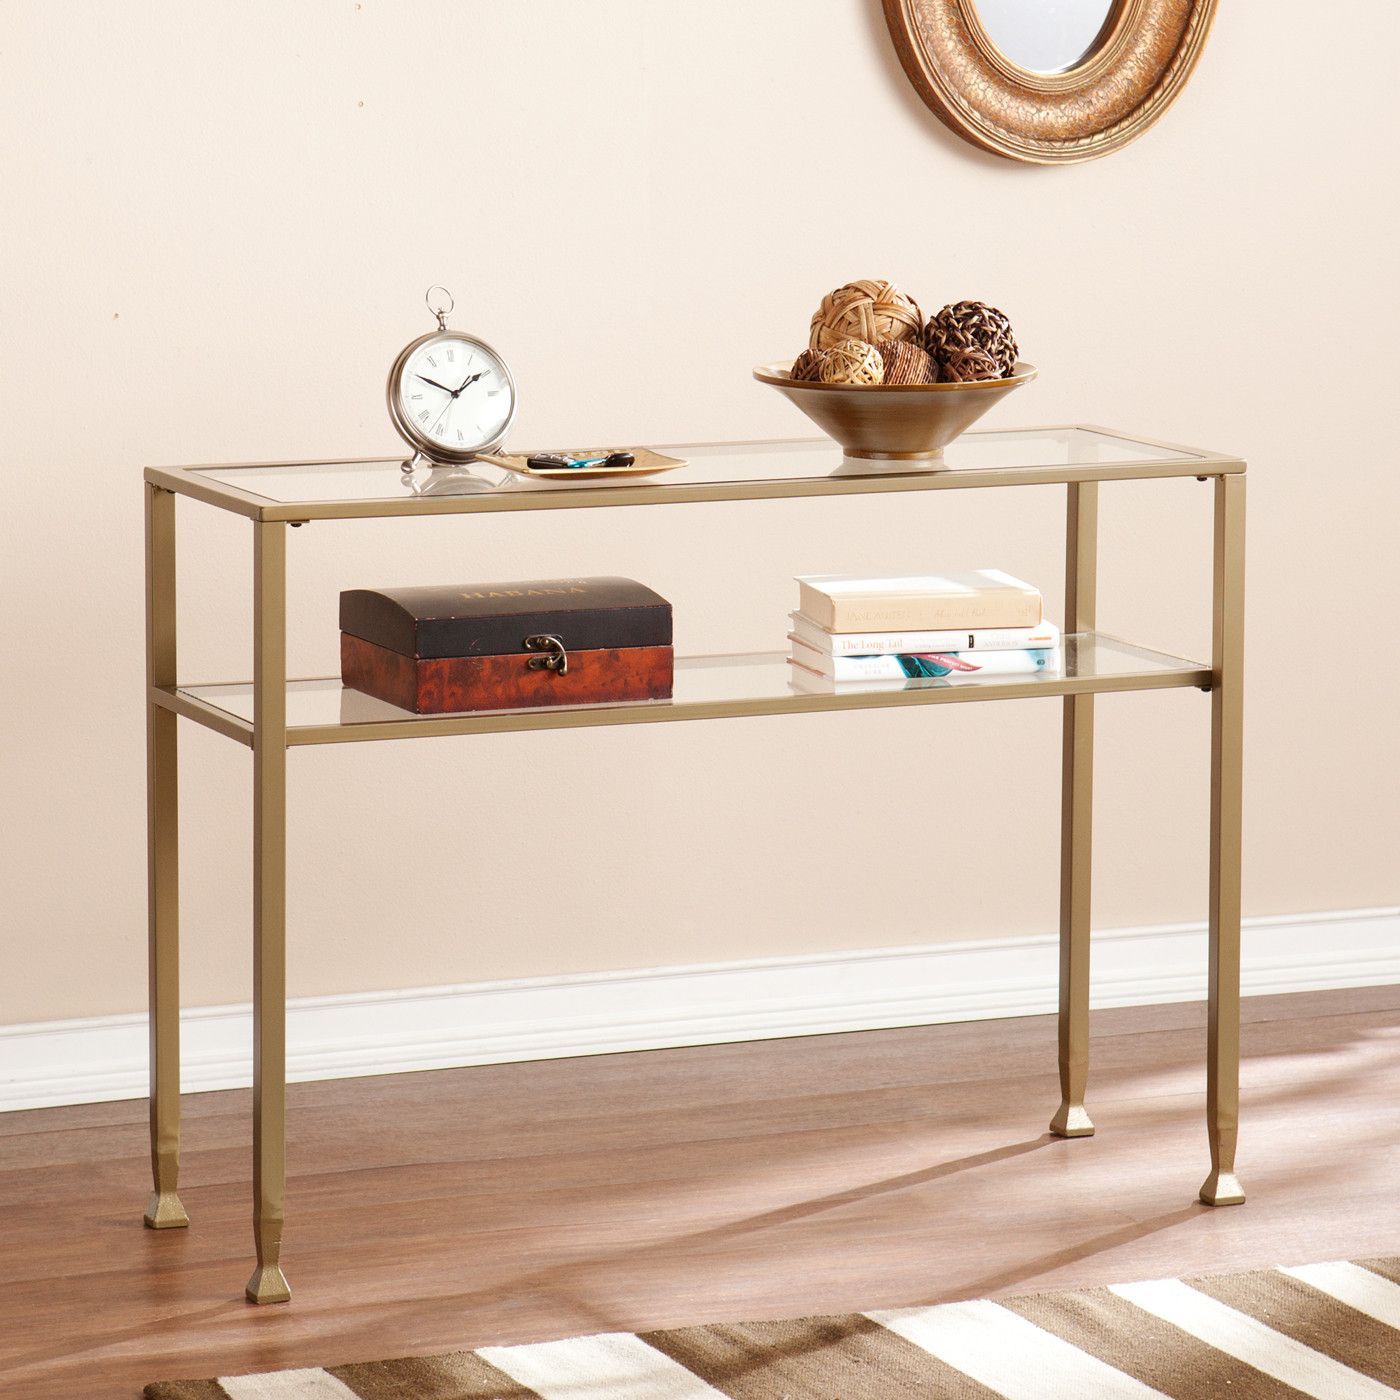 Gold Metal And Glass Console Table | Contemporary Console Table Throughout Glass And Gold Console Tables (View 5 of 20)